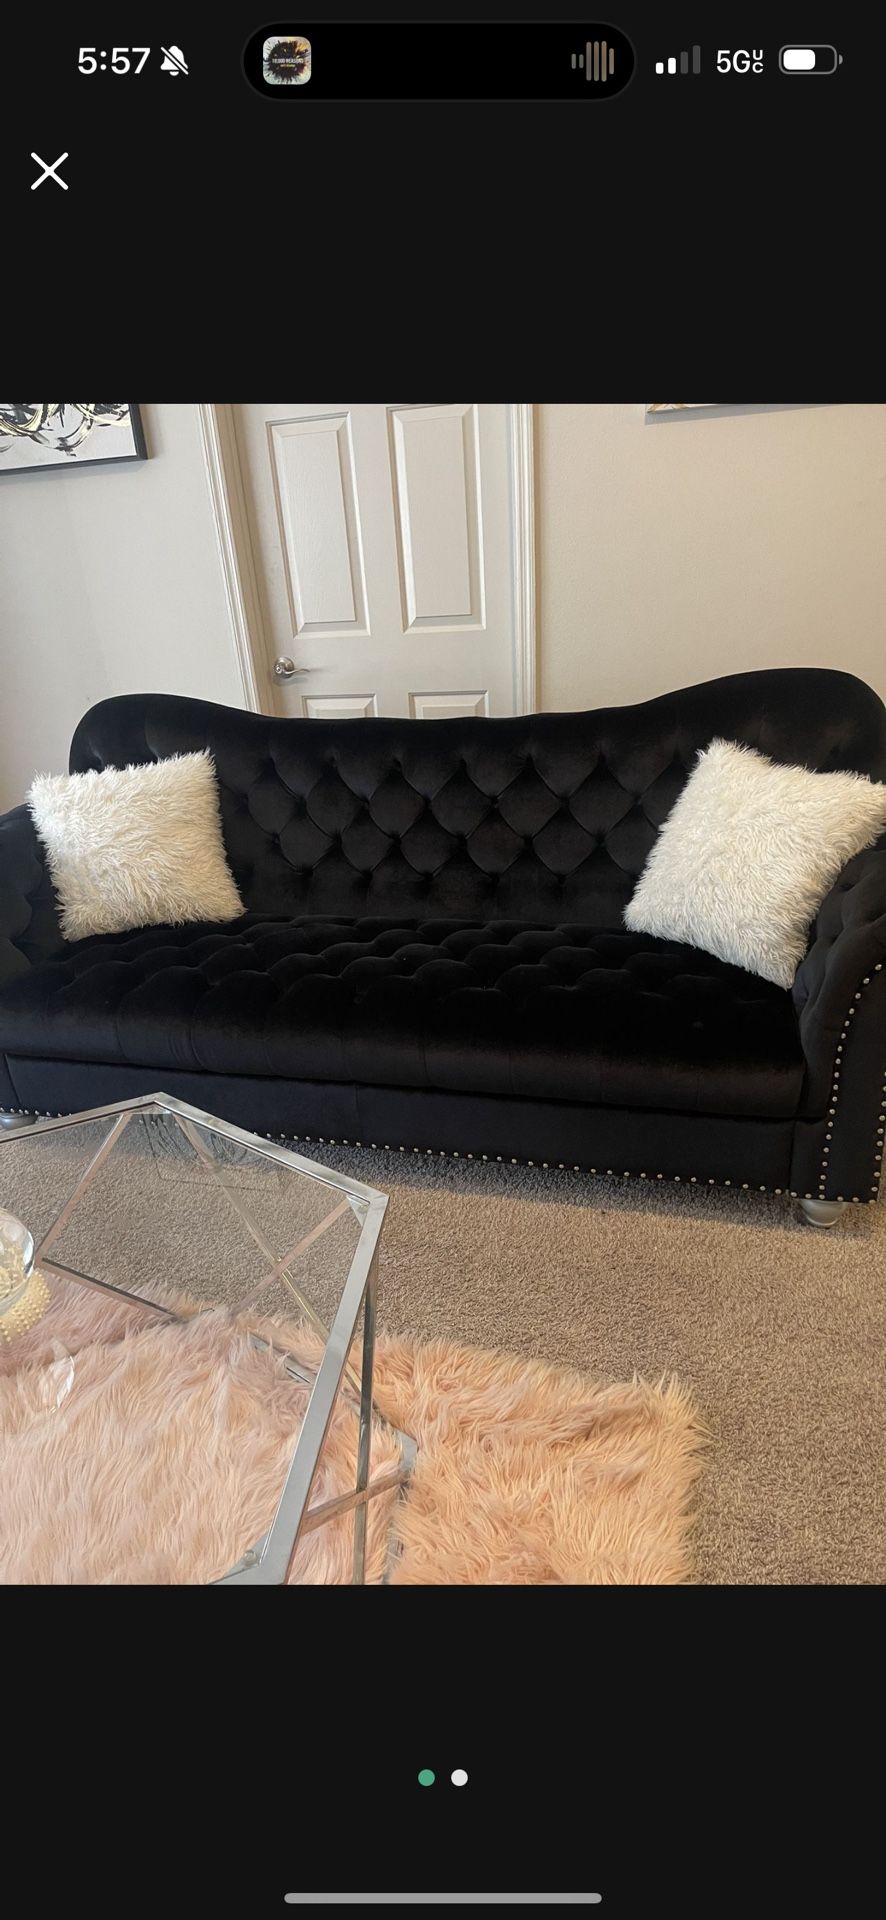 Black Couches For Sale!